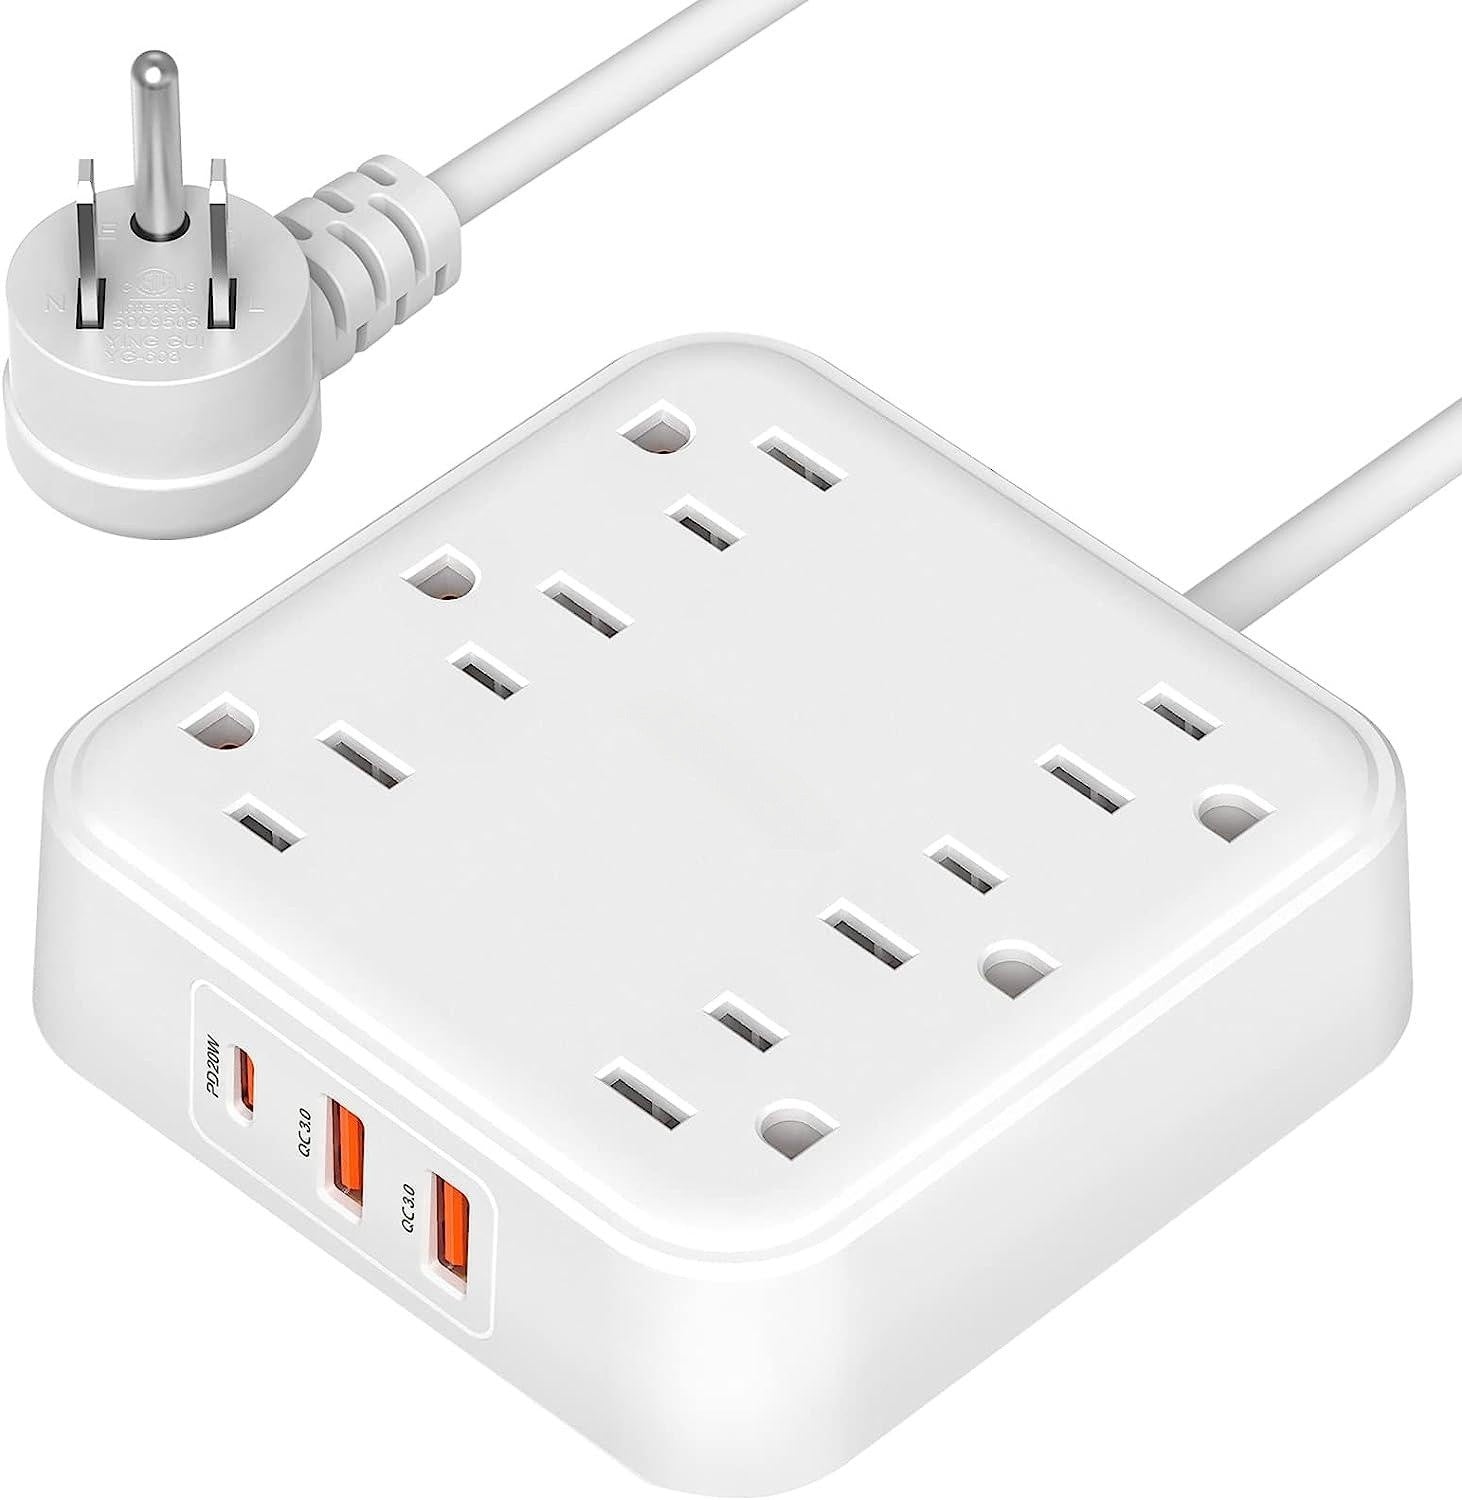 Power Strip with USB C Ports (5 Ft 3 USB Ports 6 Outlets)